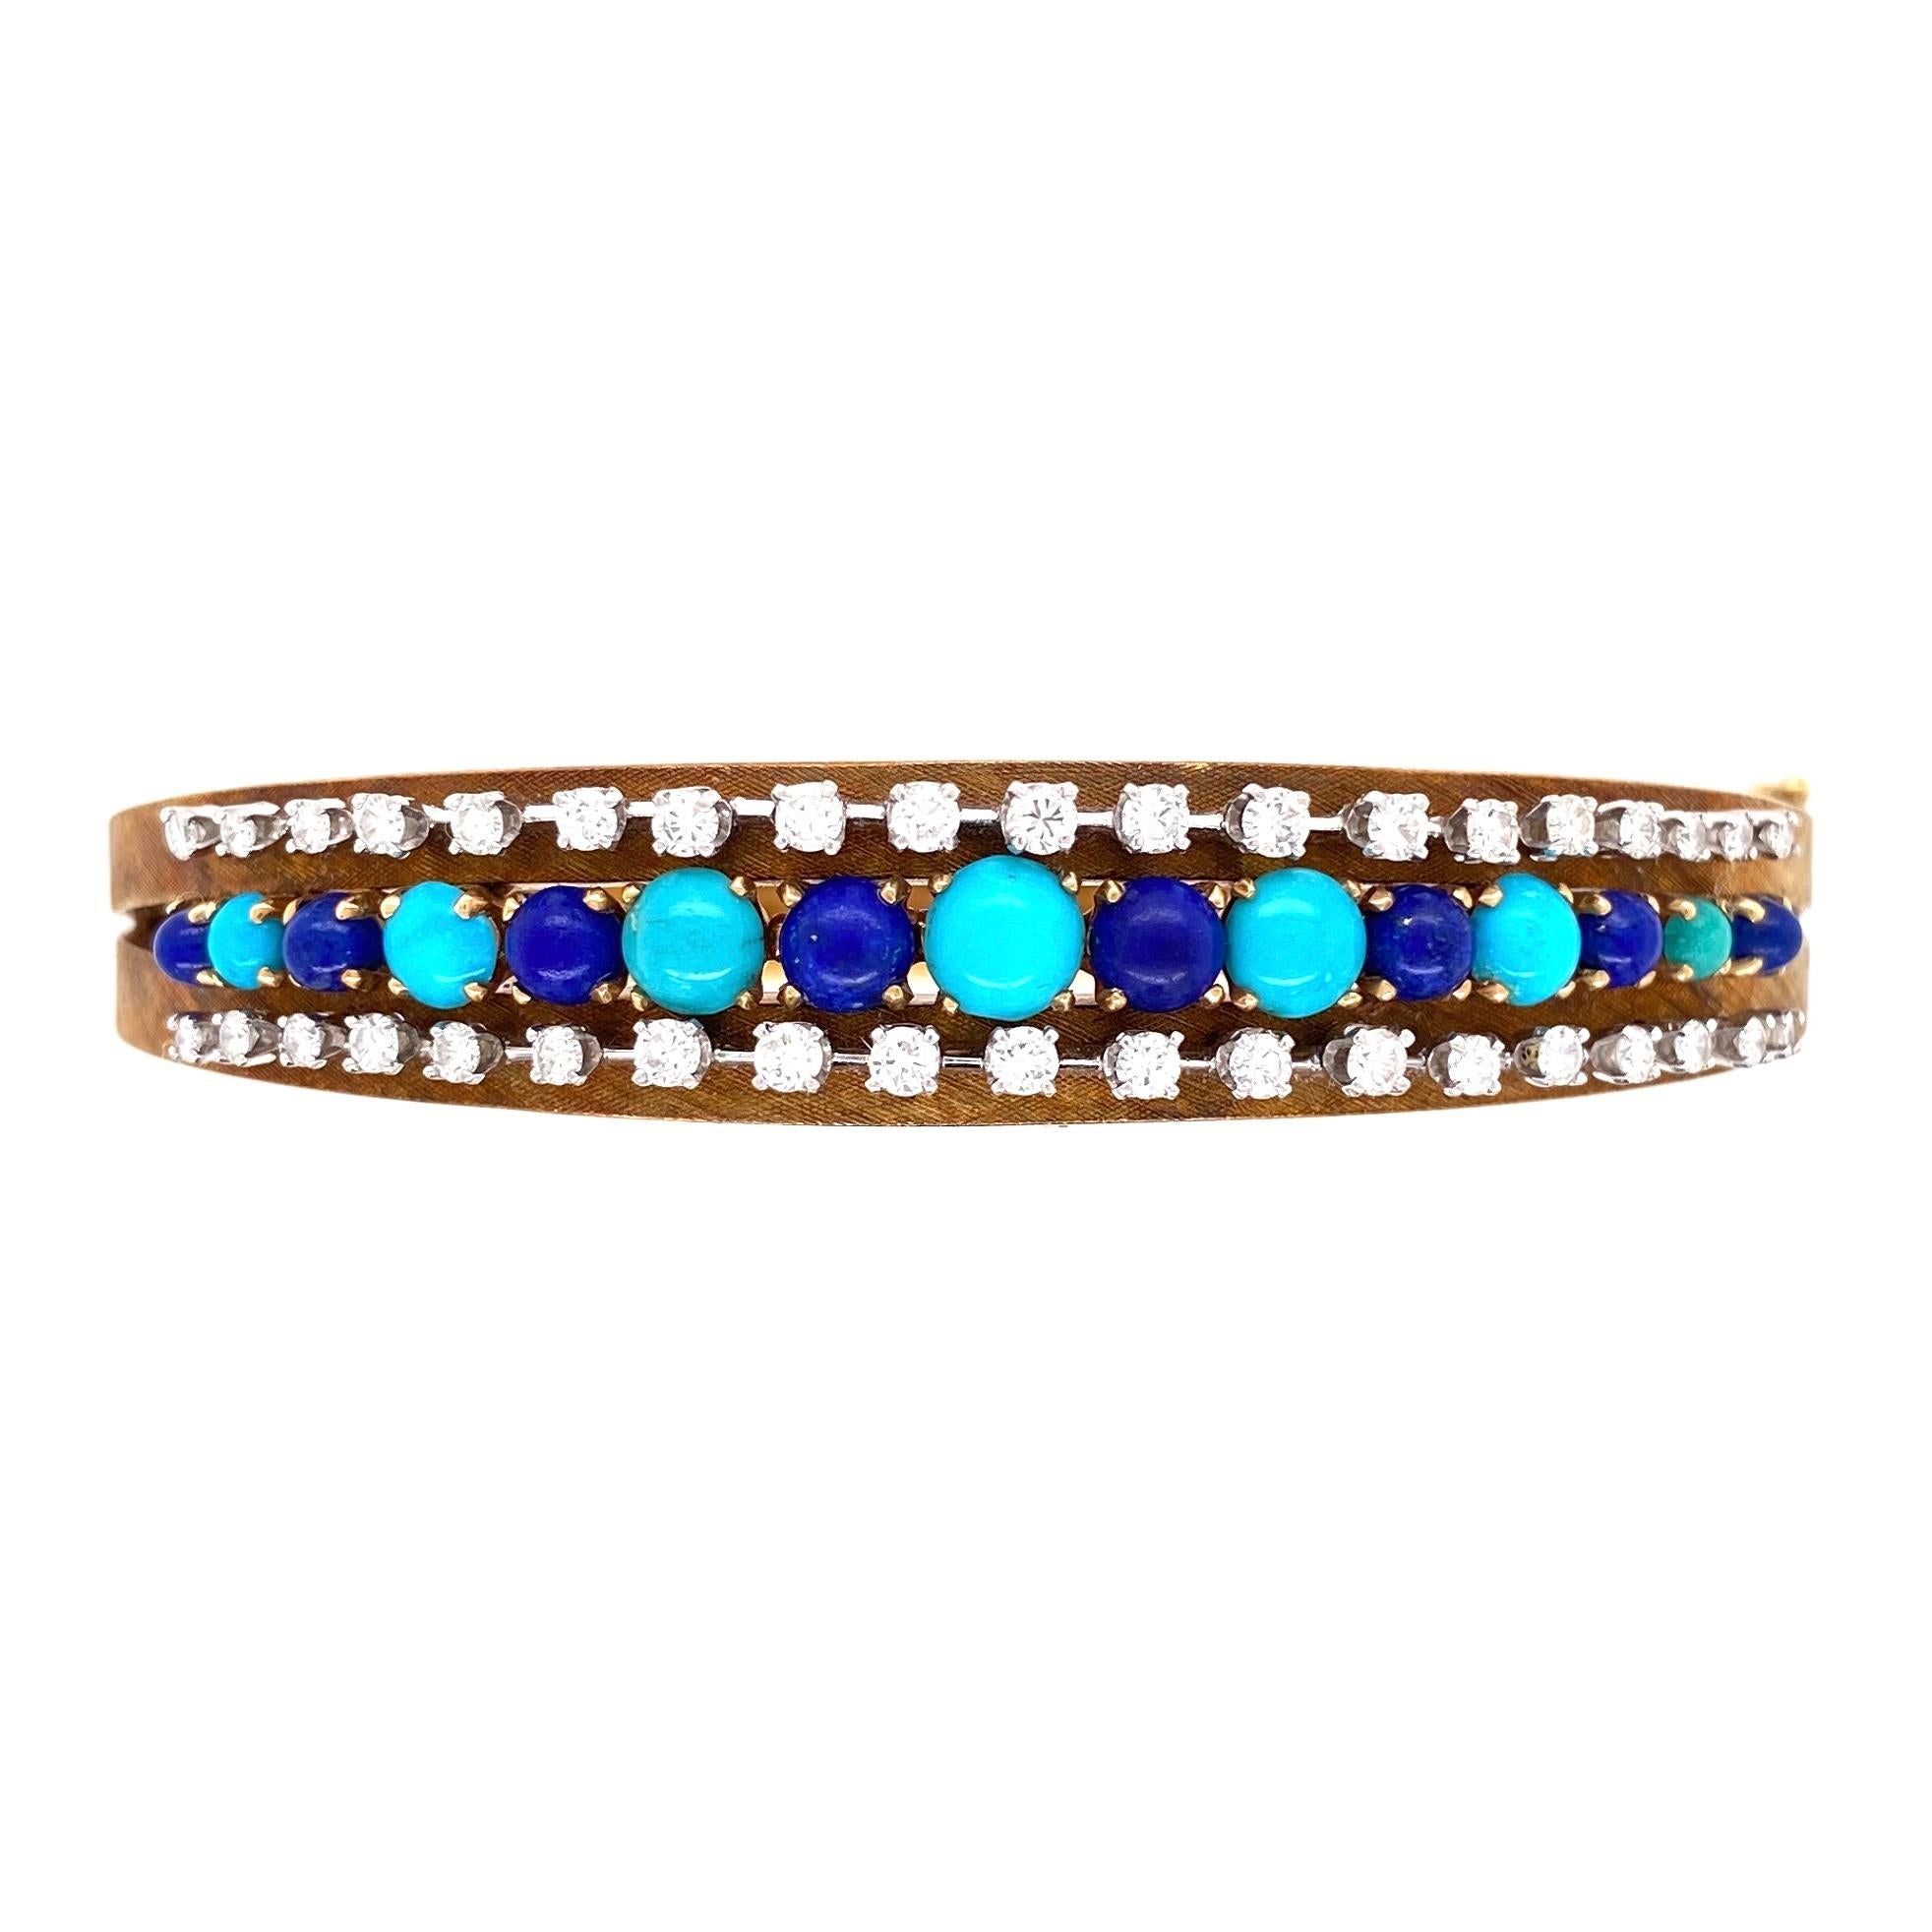 Jeweled 14K Gold Hinged Bangle Bracelet set with Turquoise, Lapis Lazuli and Diamond. Approx. 1.00 total Diamond Carat weight. Hand set and Hand crafted in 14 Karat yellow Gold. Classic and Timeless...A perfect compliment to your wardrobe! 
